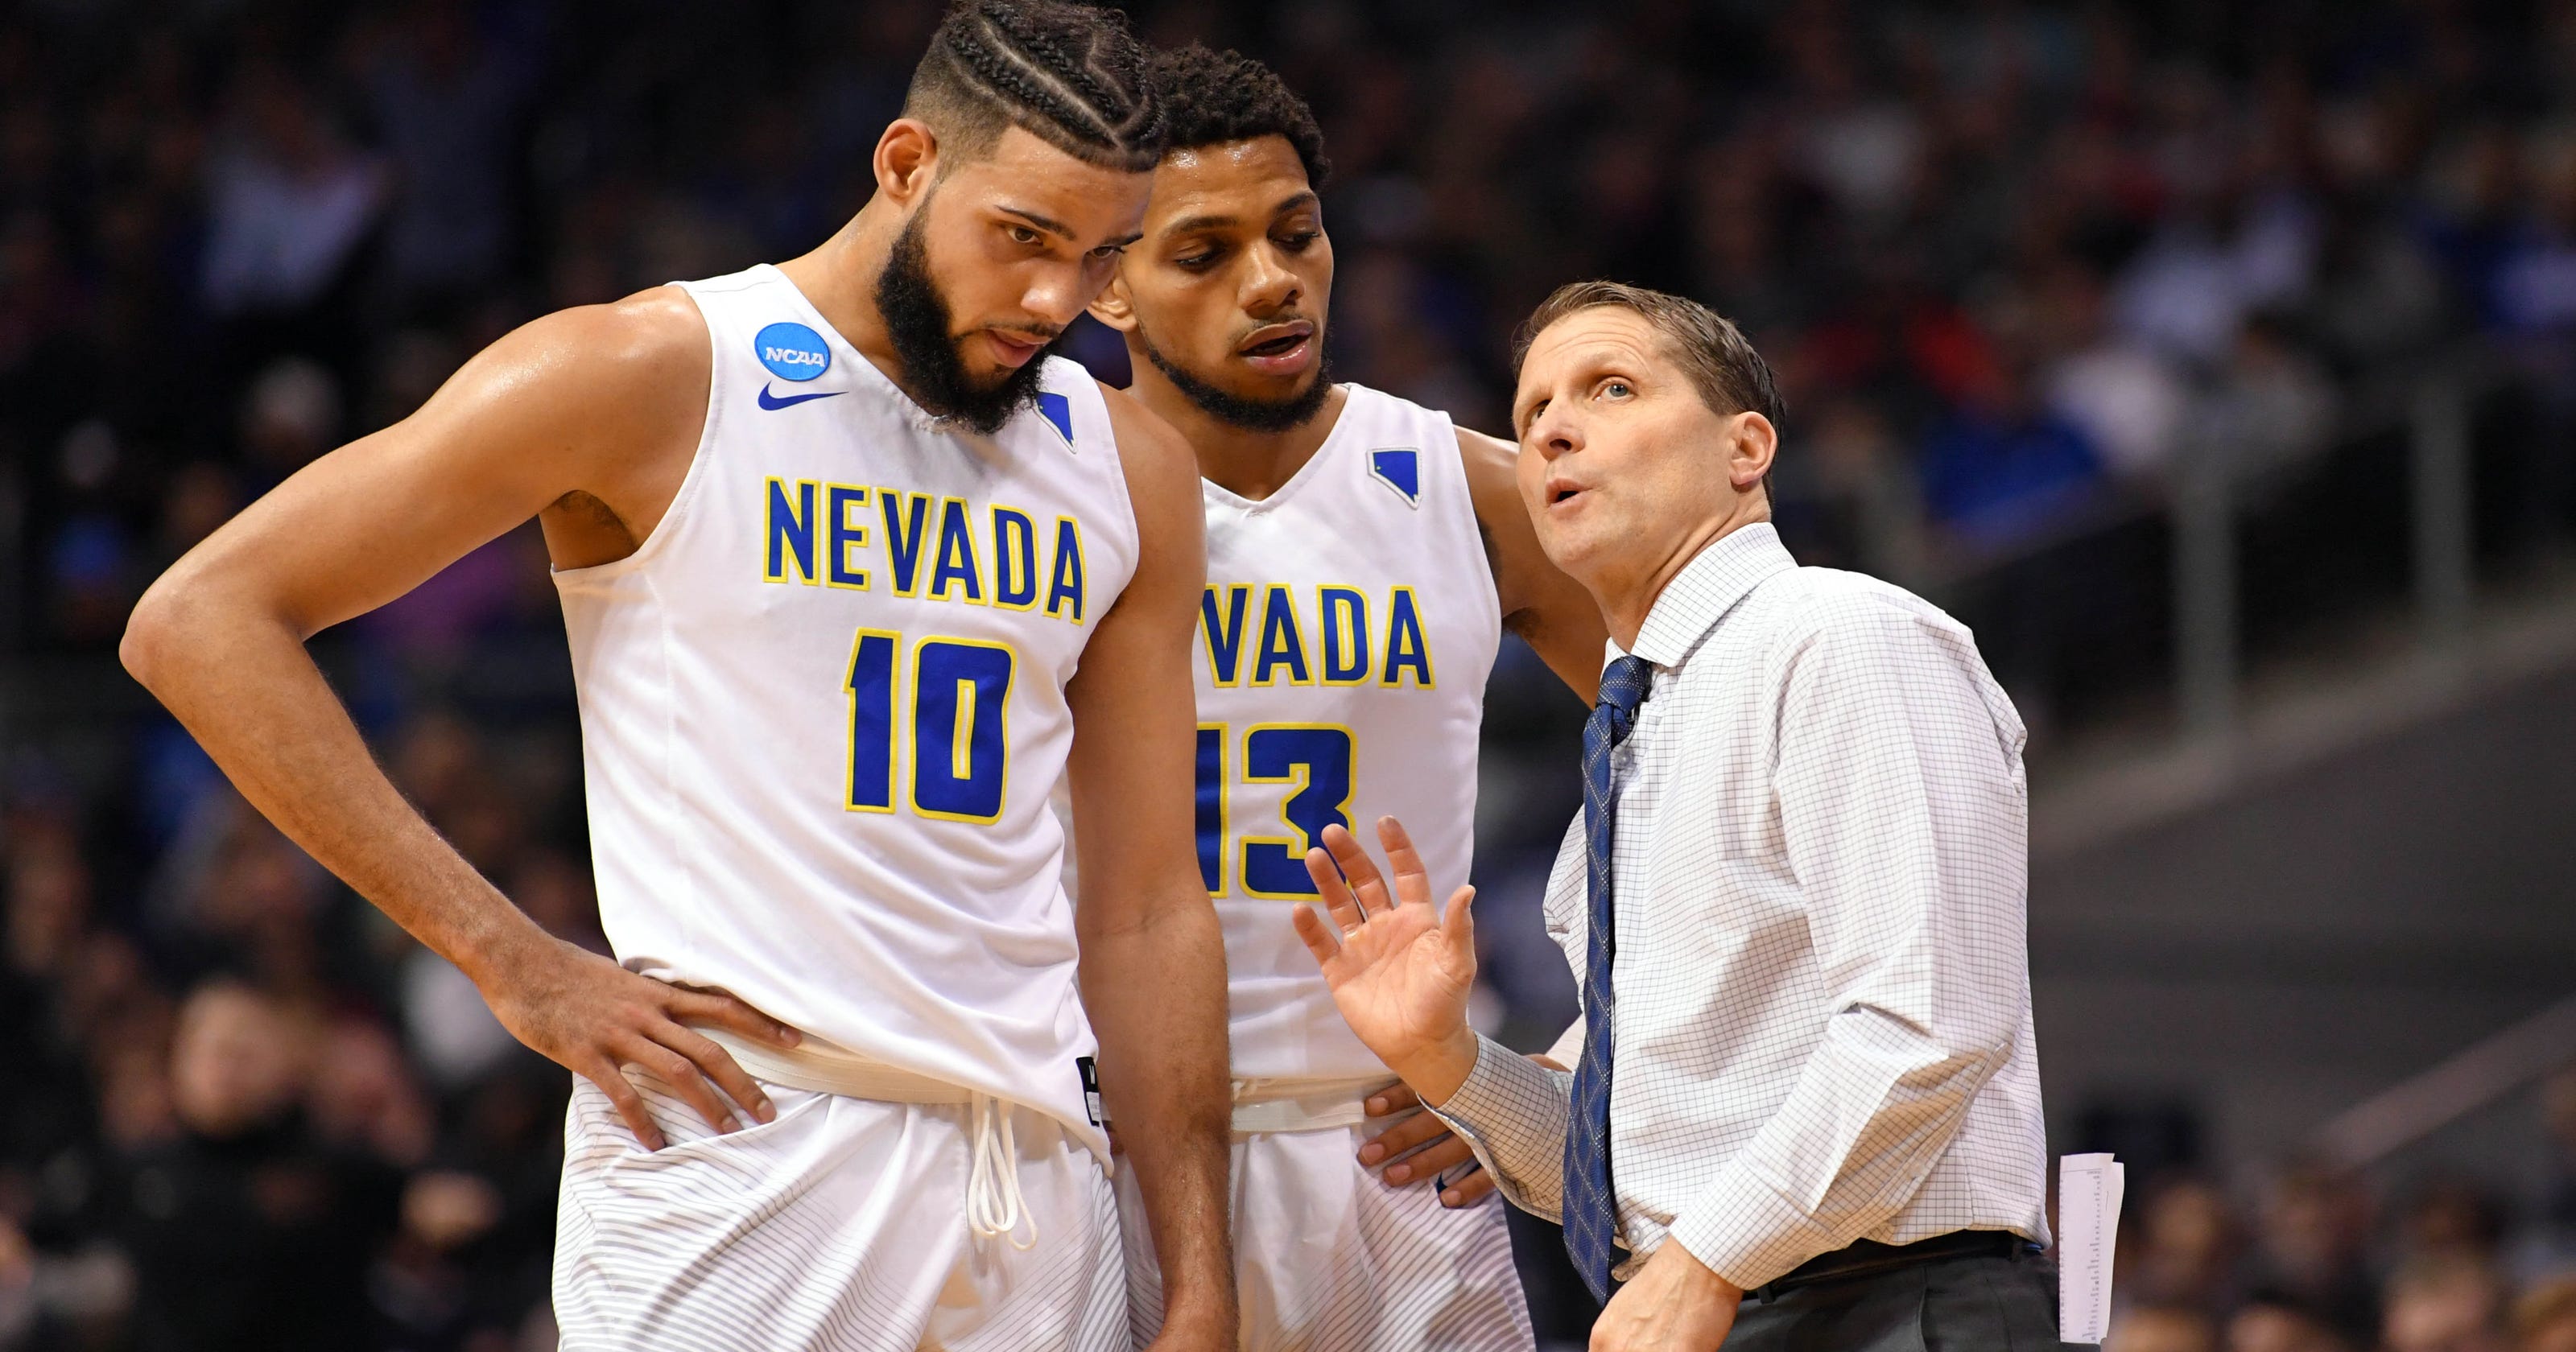 Nevada basketball team will play two exhibition games in Reno